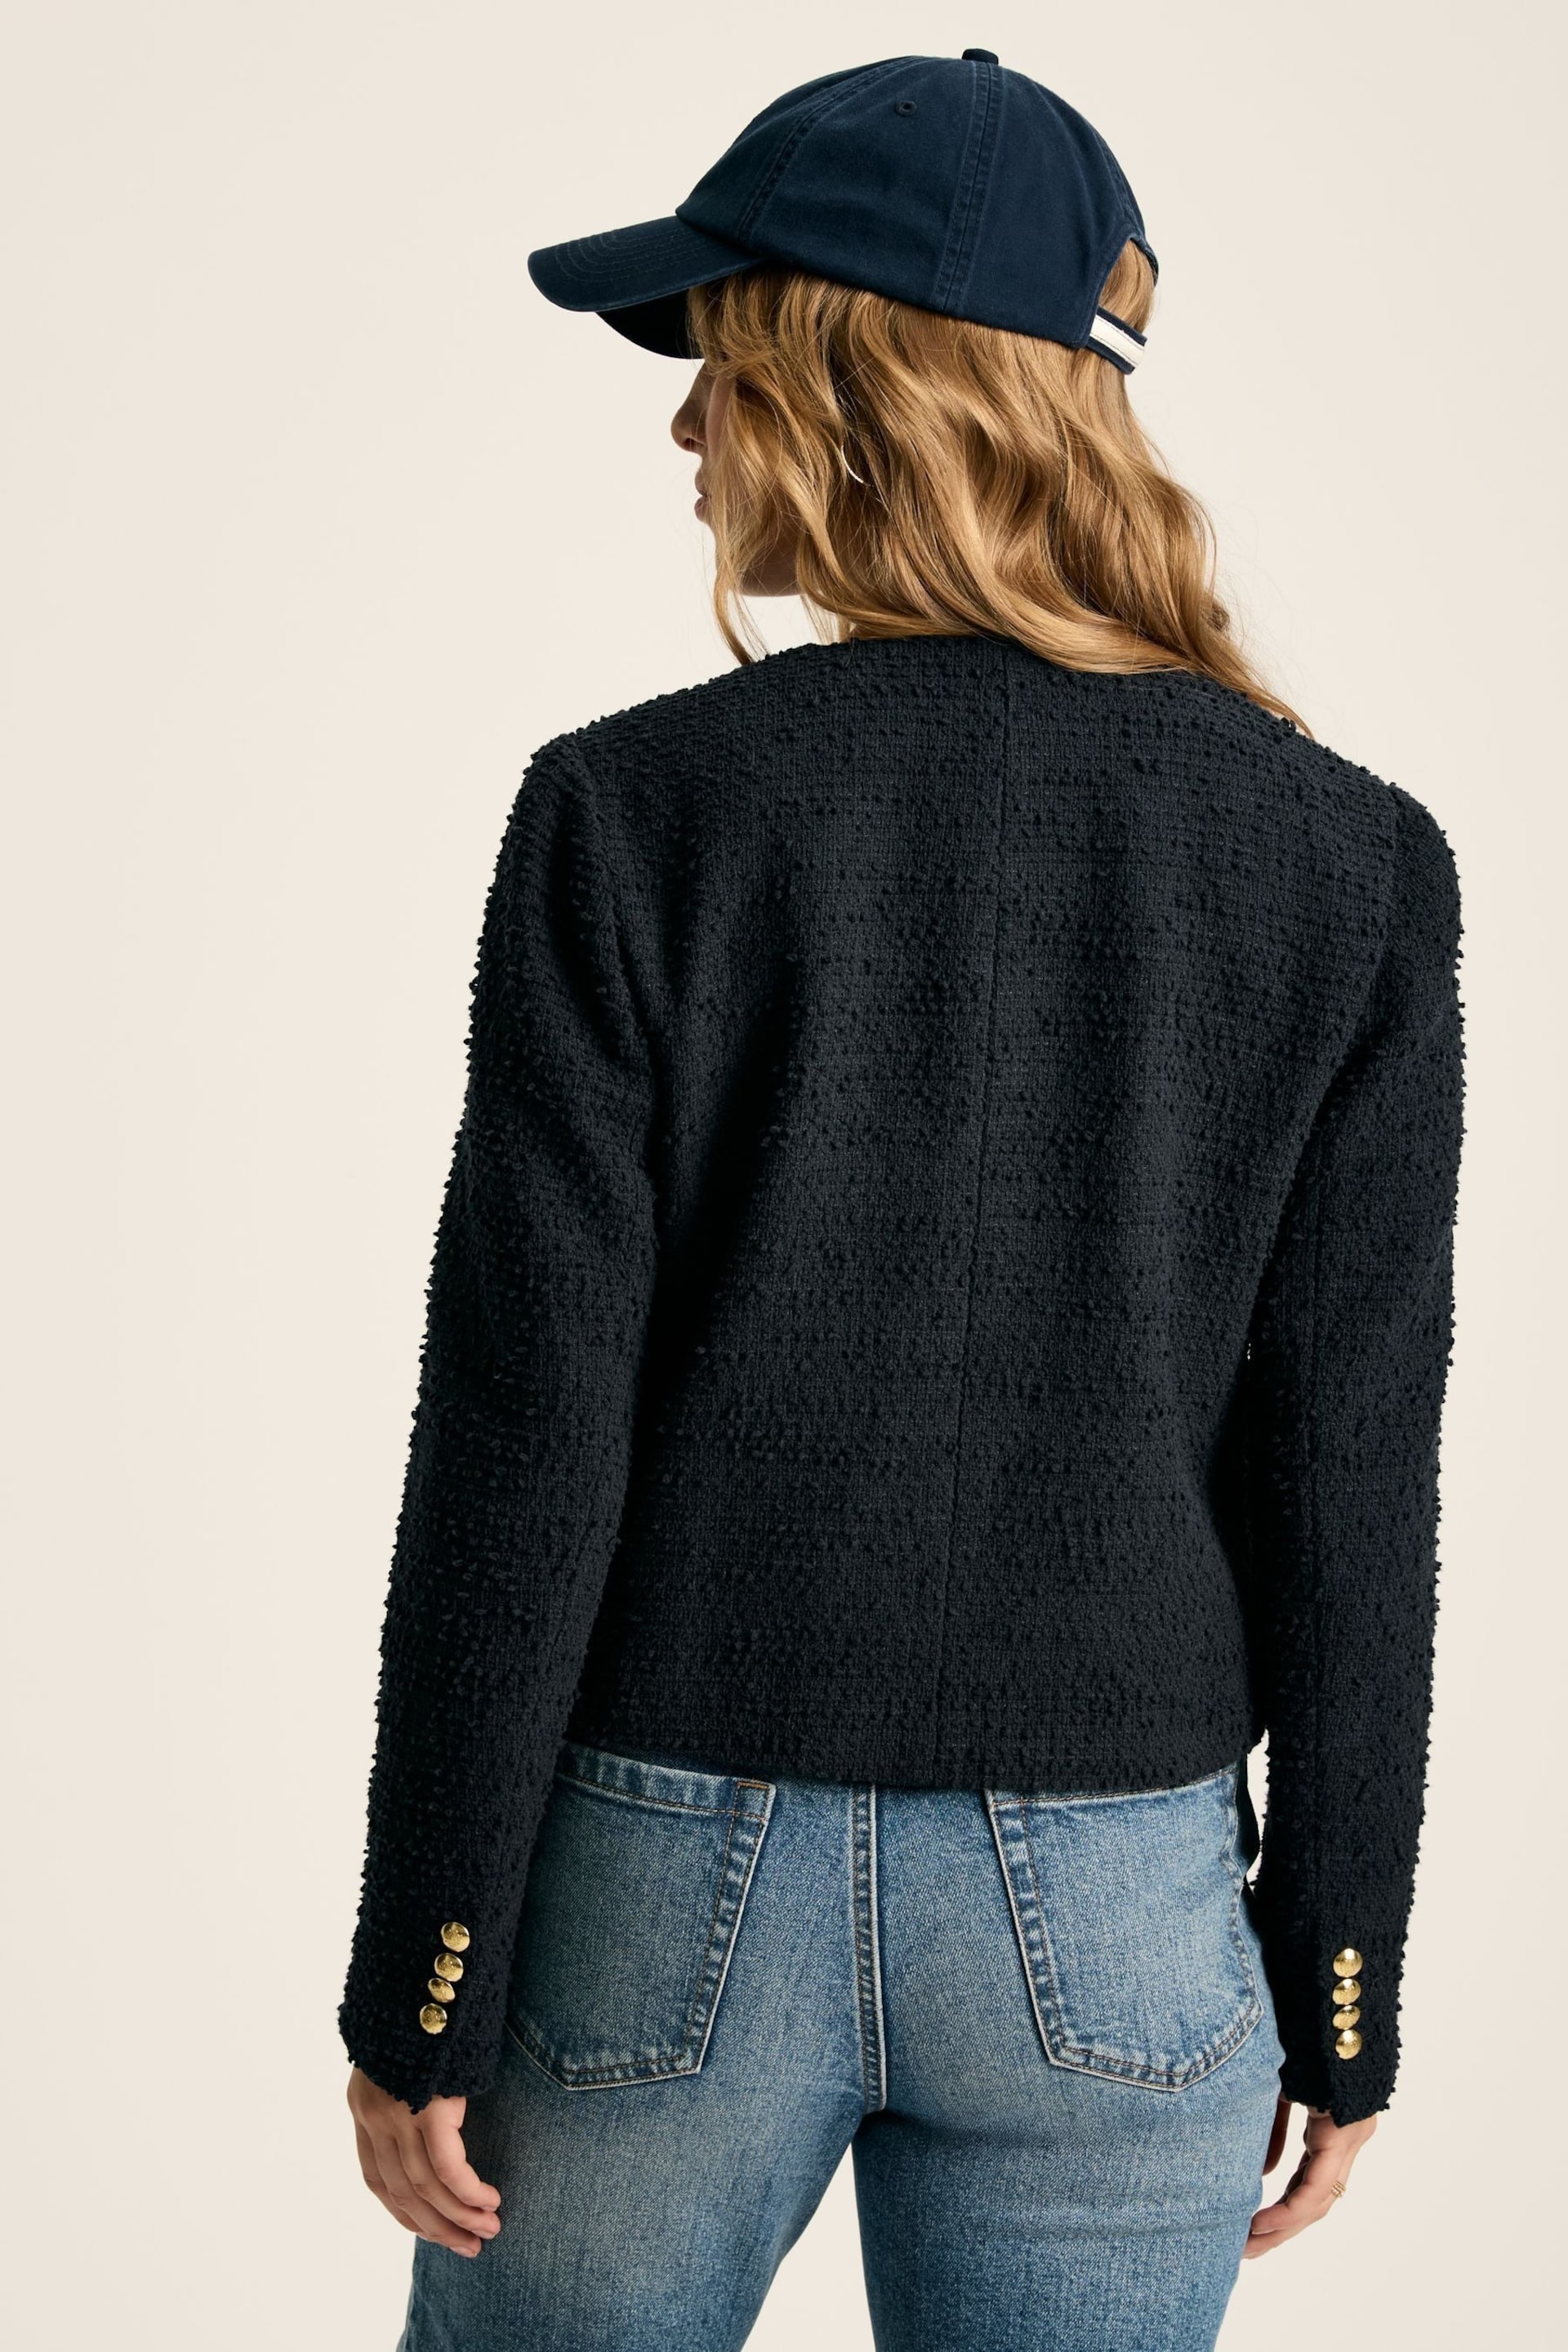 Joules Hampstead Navy Boucle Jacket - Image 4 of 6